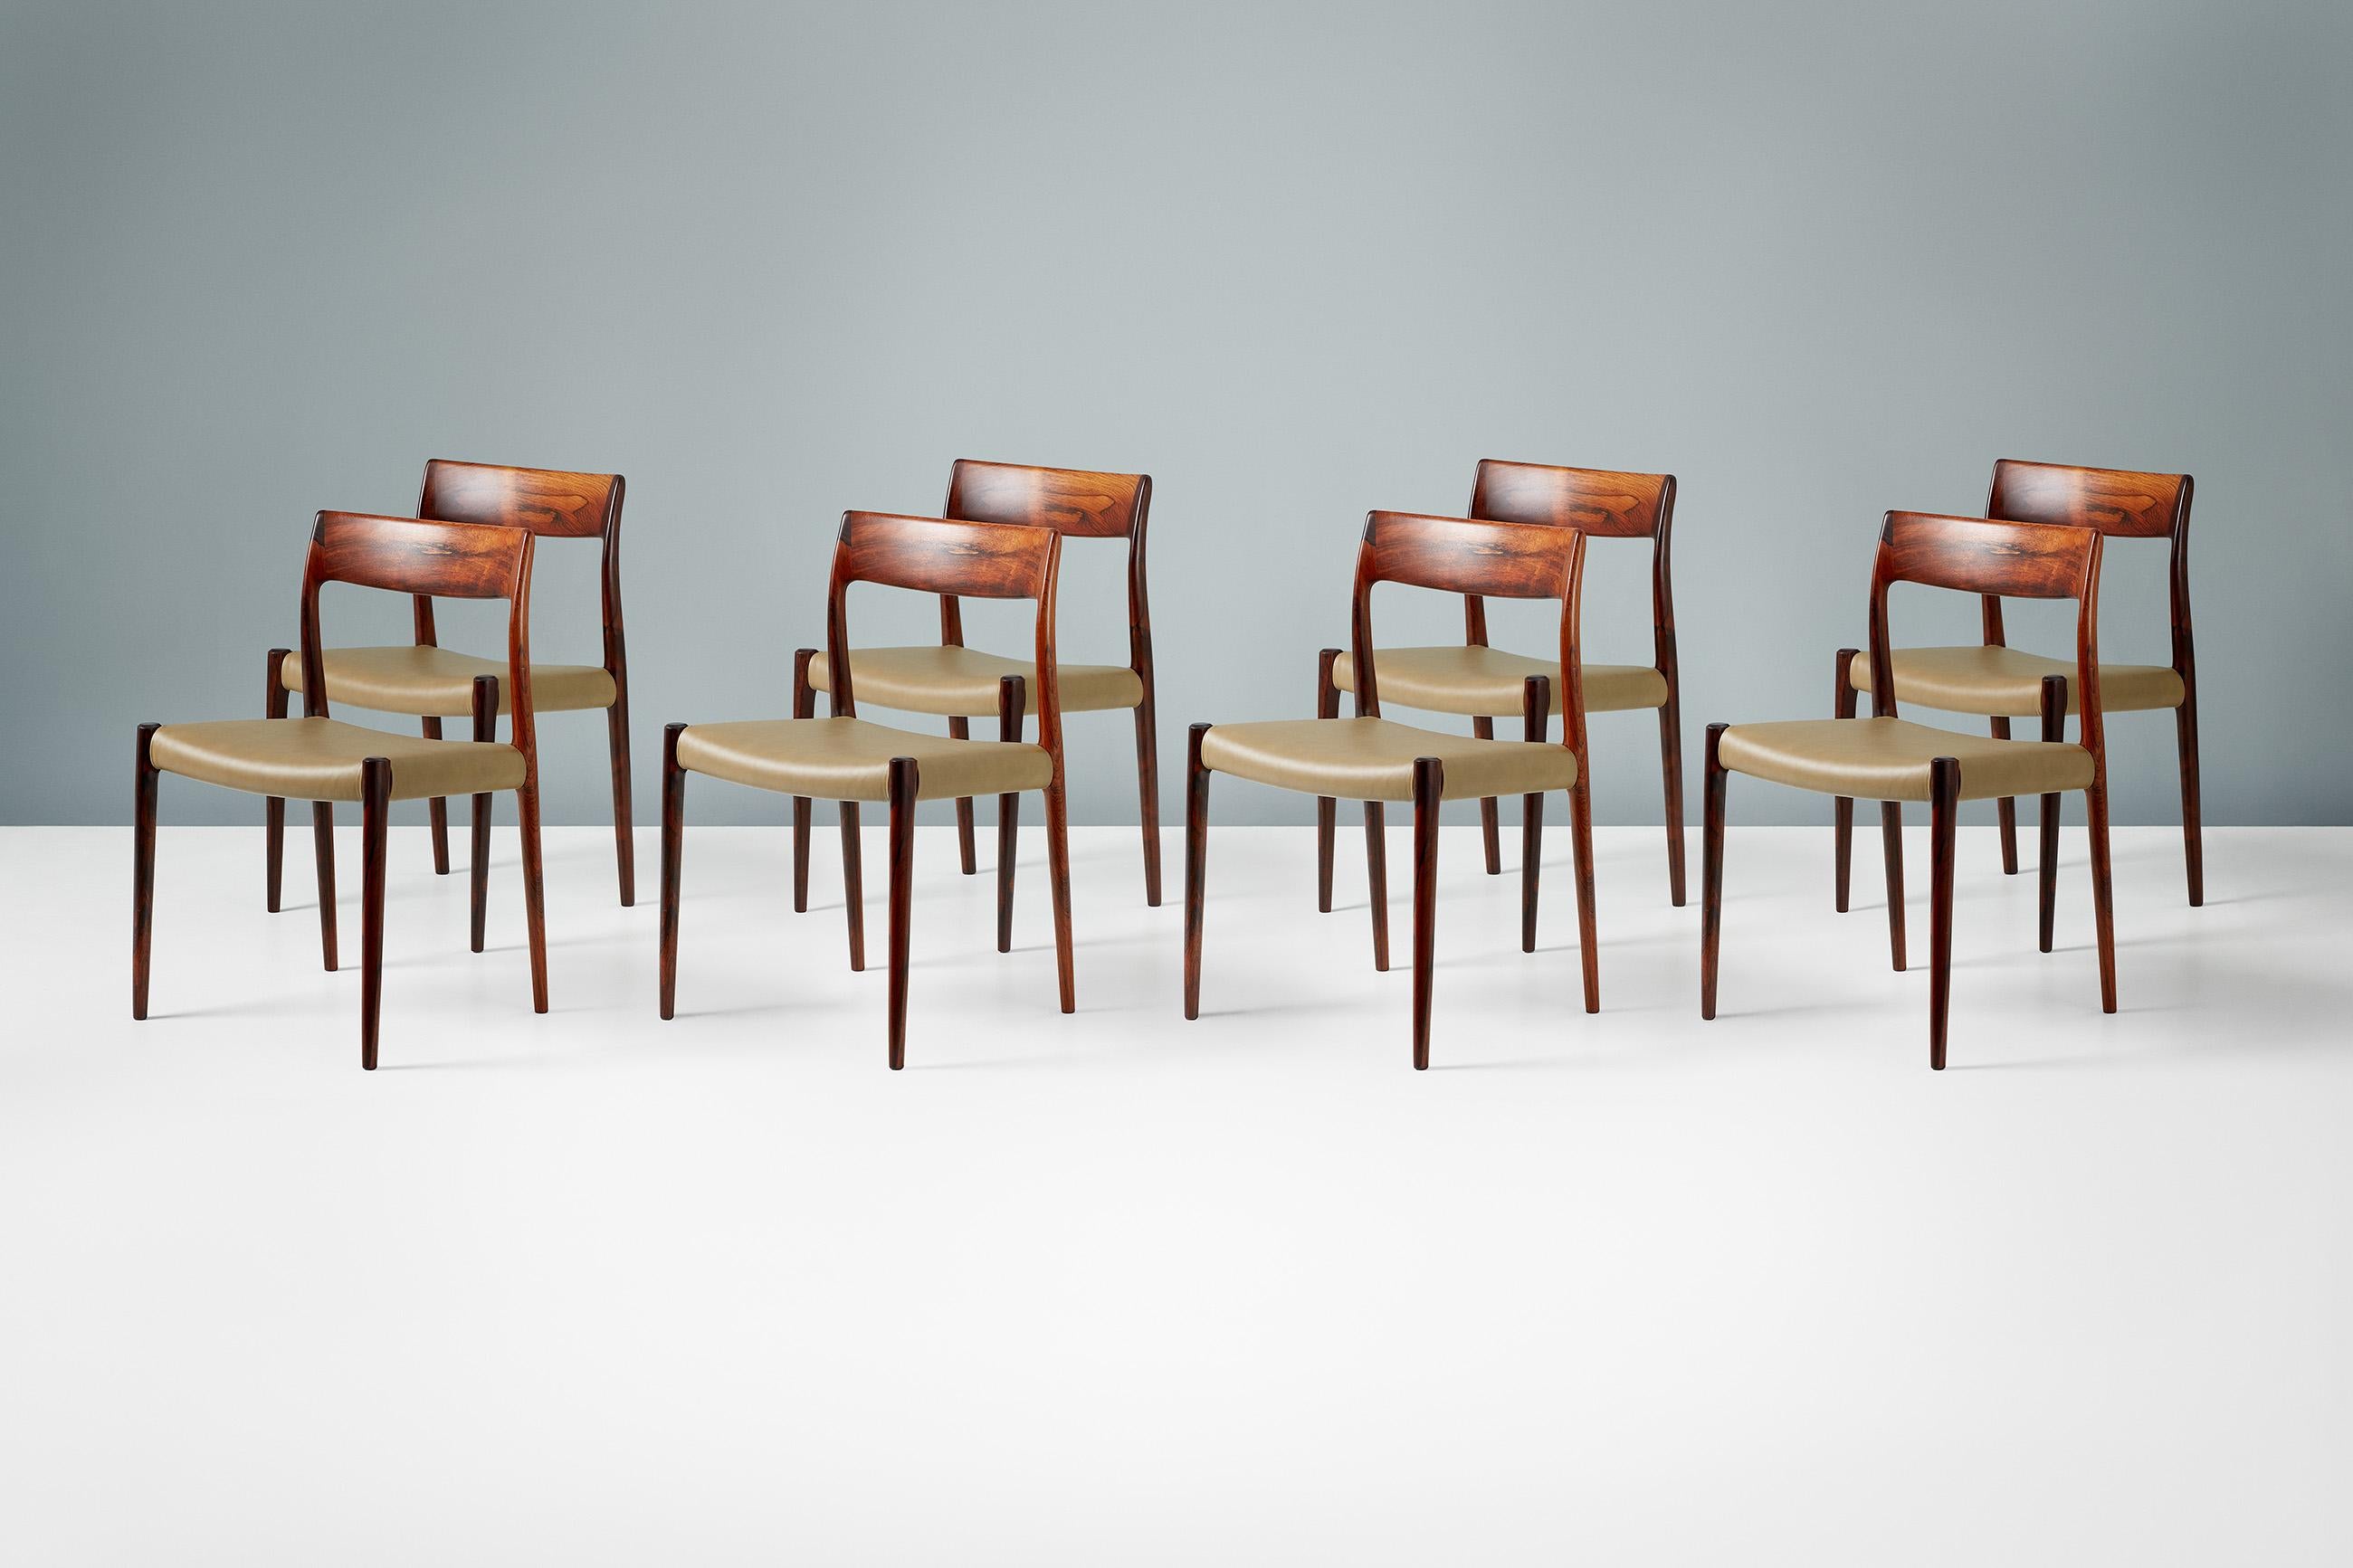 Niels Moller

Model 77 dining chairs, 1959

Set of 8 rosewood dining chairs designed by Niels O. Moller for J.L. Moller Mobelfabrik, Denmark in 1959. Produced c1960s. The seats have been upholstered in new green aniline leathers. Other